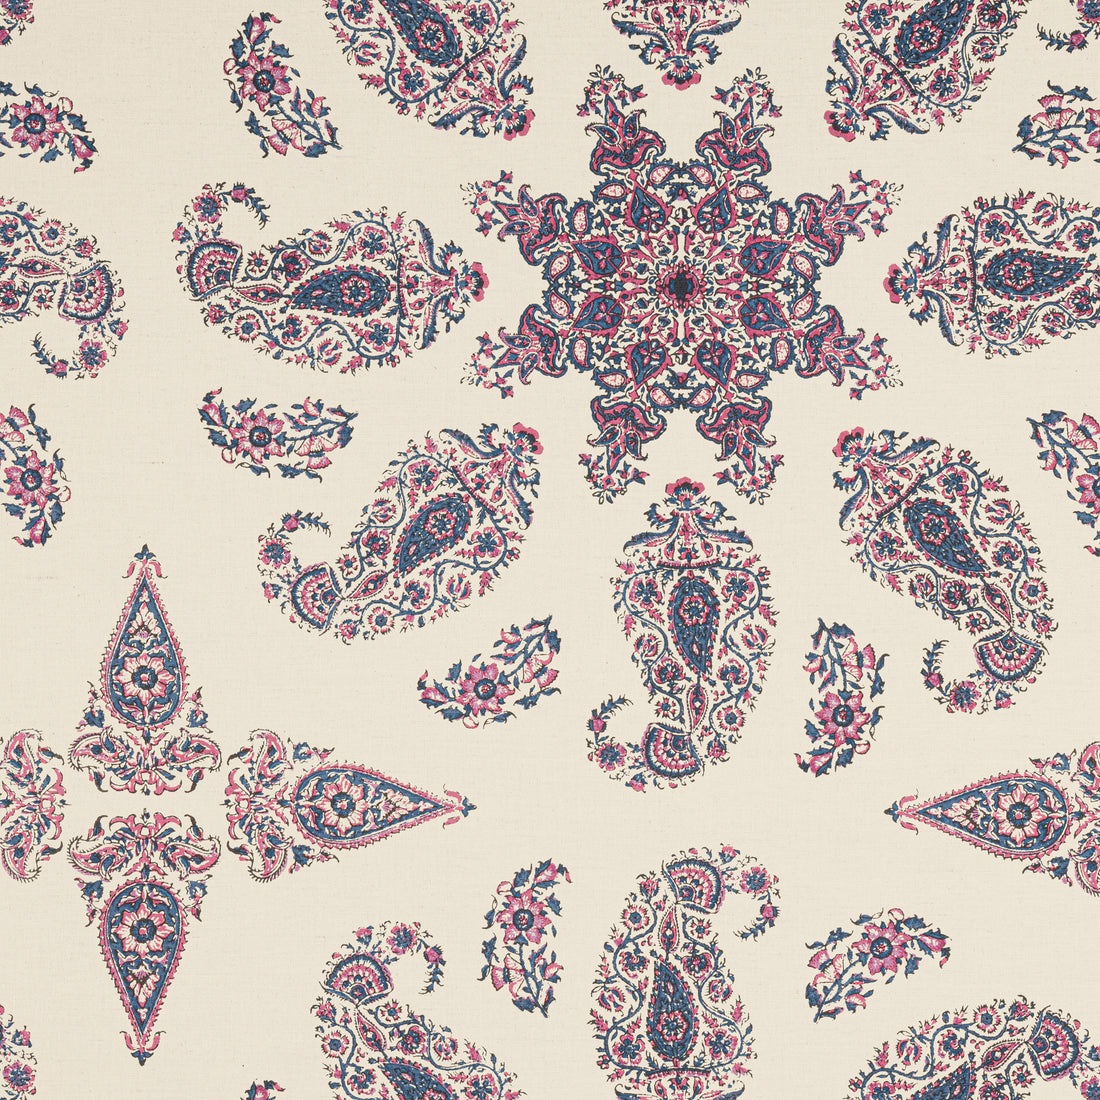 East India fabric in raspberry and blue on natural color - pattern number F936430 - by Thibaut in the Indienne collection